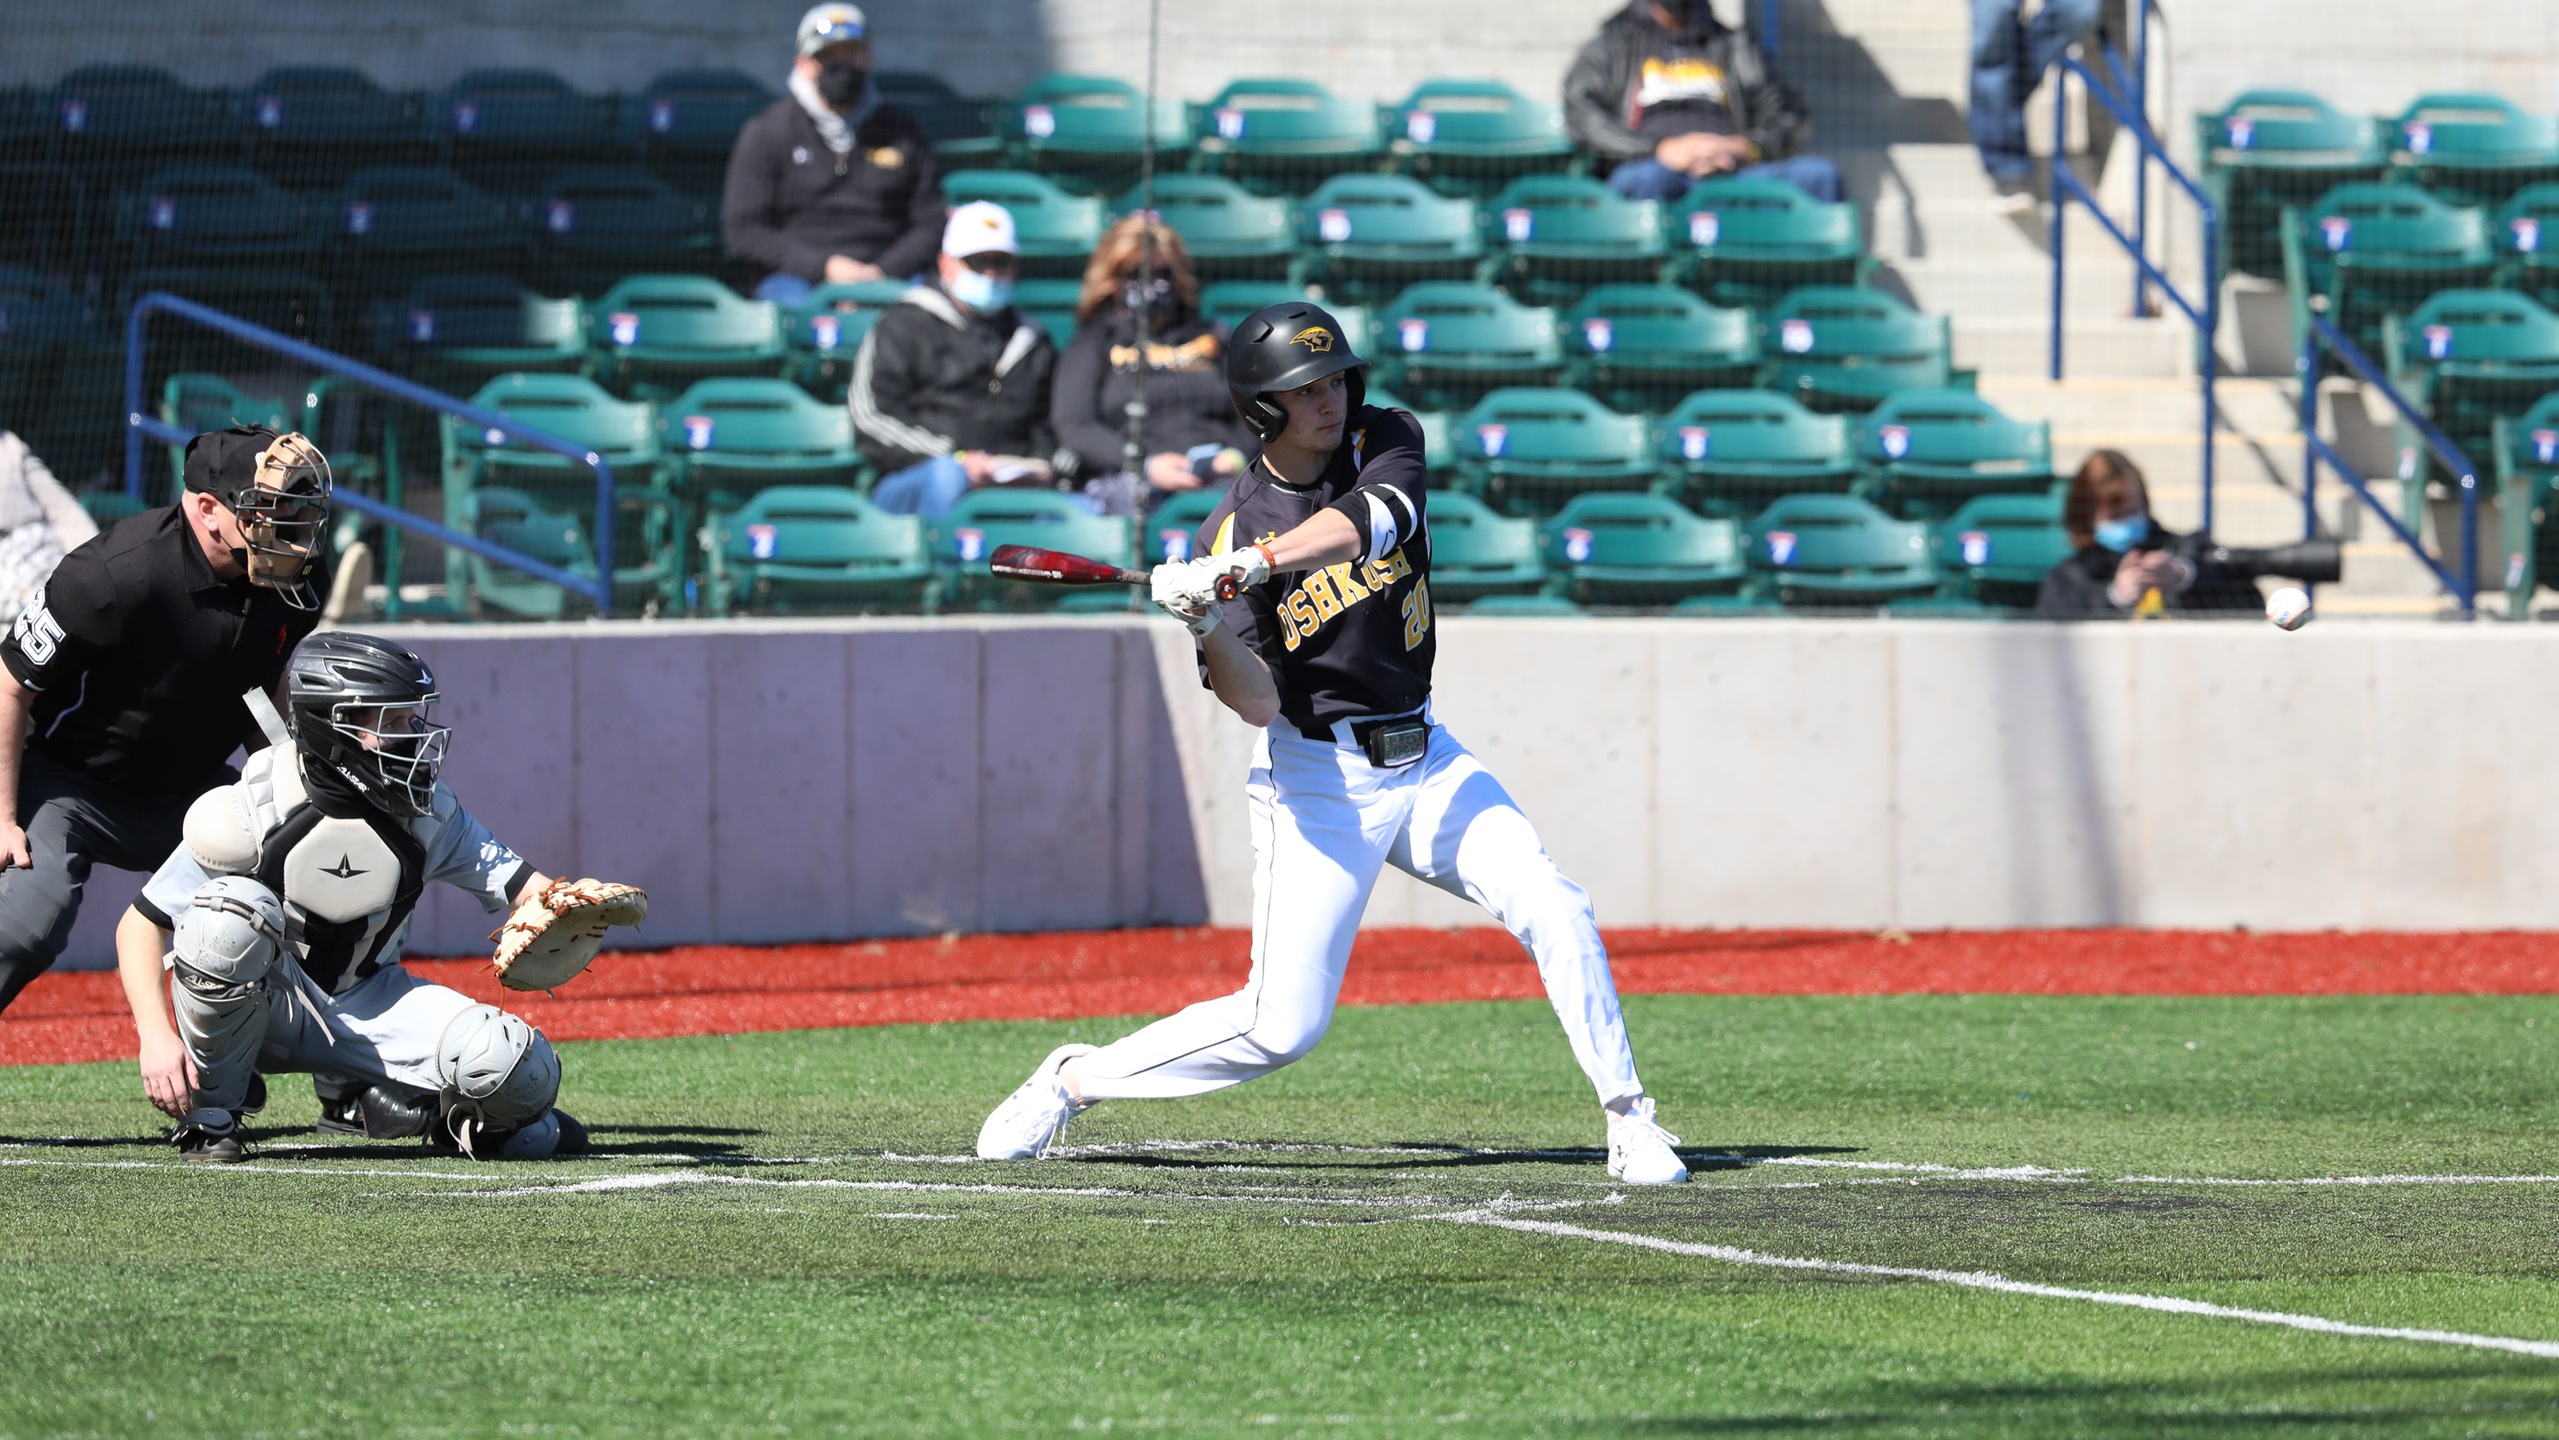 Matt Scherrman concluded UW-Oshkosh's doubleheader against UW-Eau Claire with two home runs and 11 runs batted in.